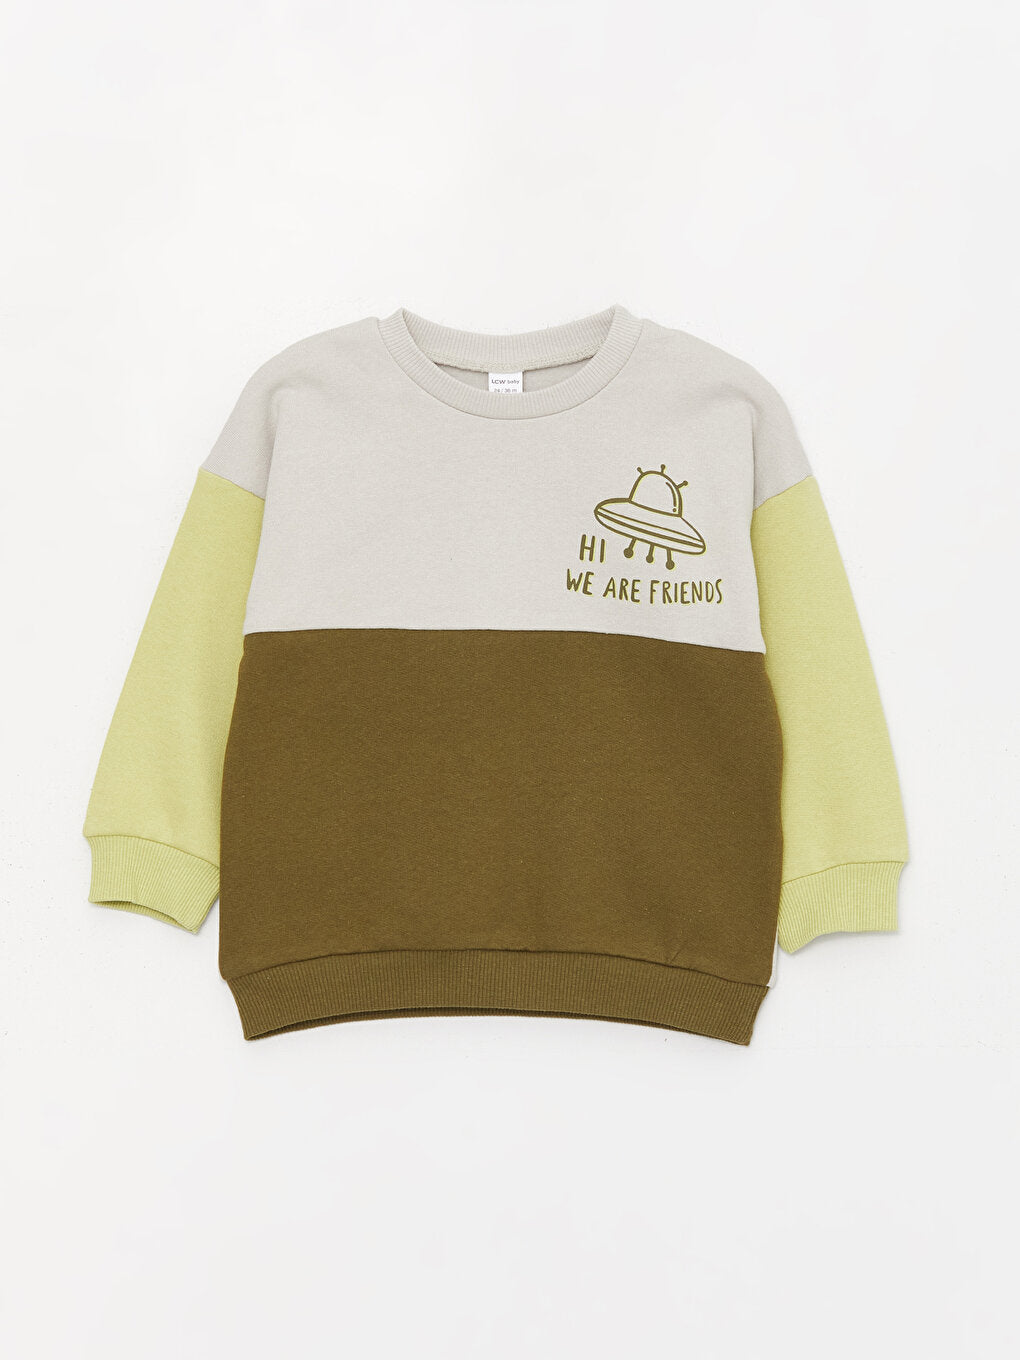 Crew Neck Long Printed Baby Boy Sweatshirt And Trousers 2-Piece Set